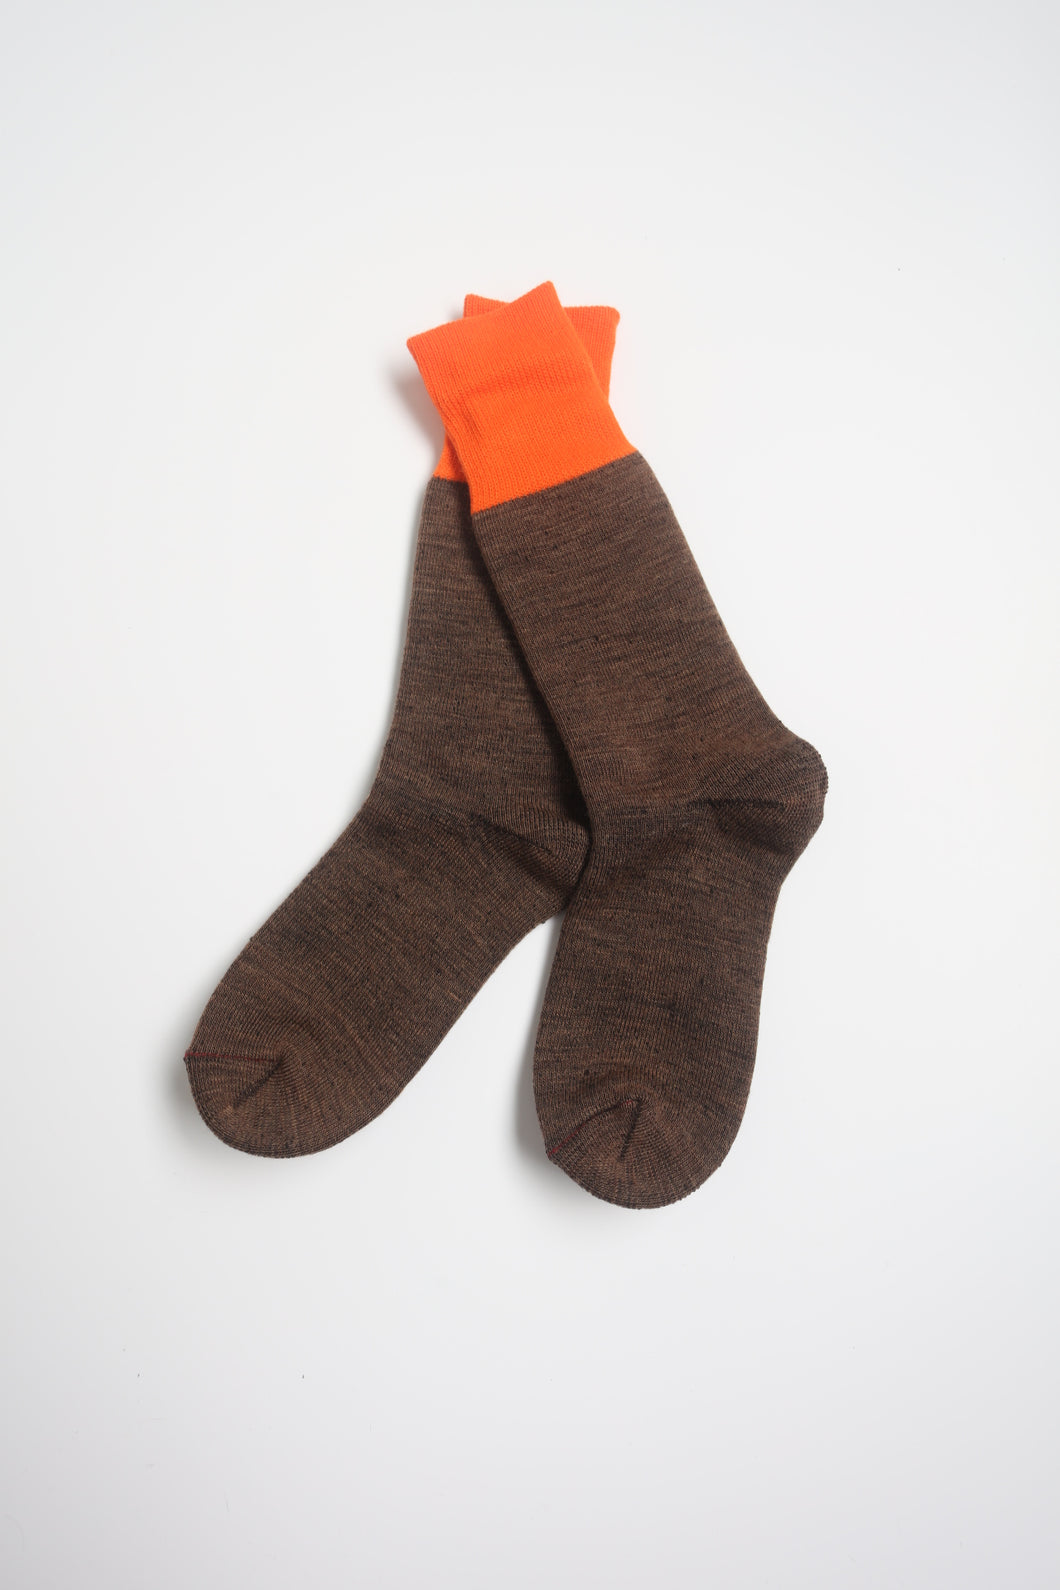 Hybrid Boot Crew in Brown and Orange